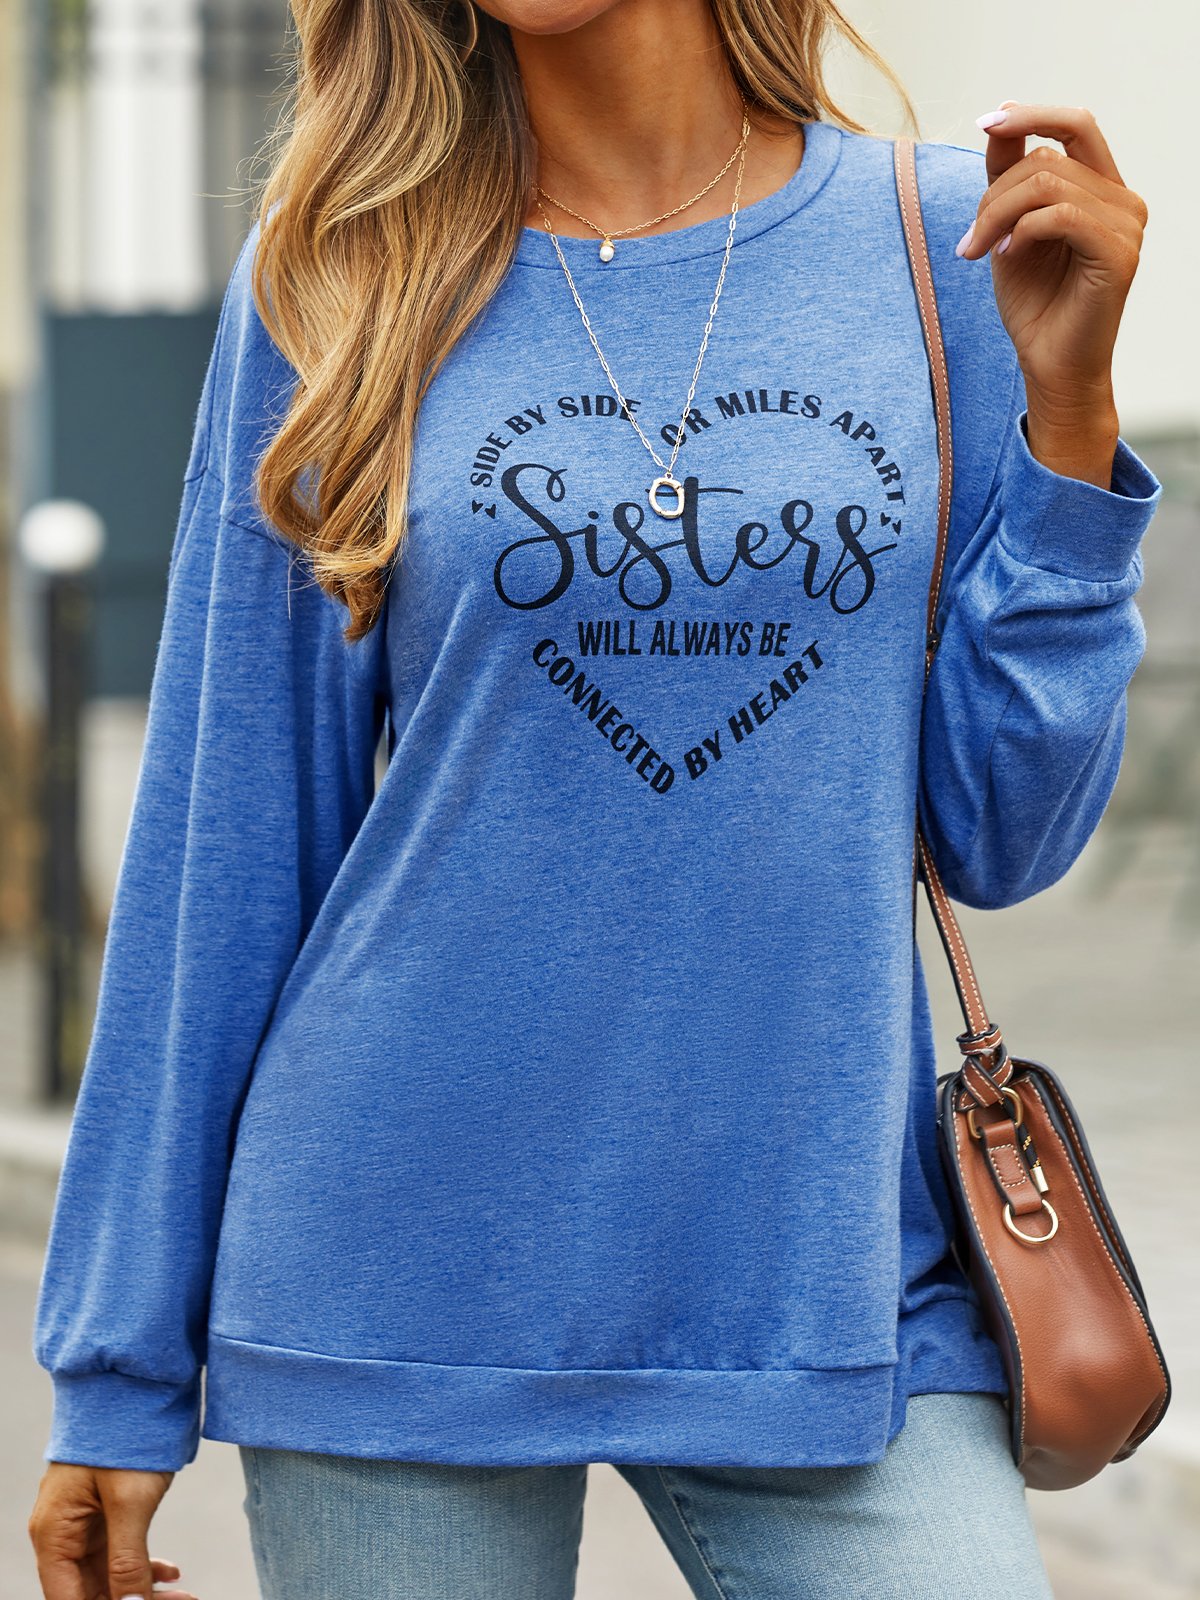 JFN Women "Sister Will Always Connected By Heart" Casual Long Sleeve Shirt Top